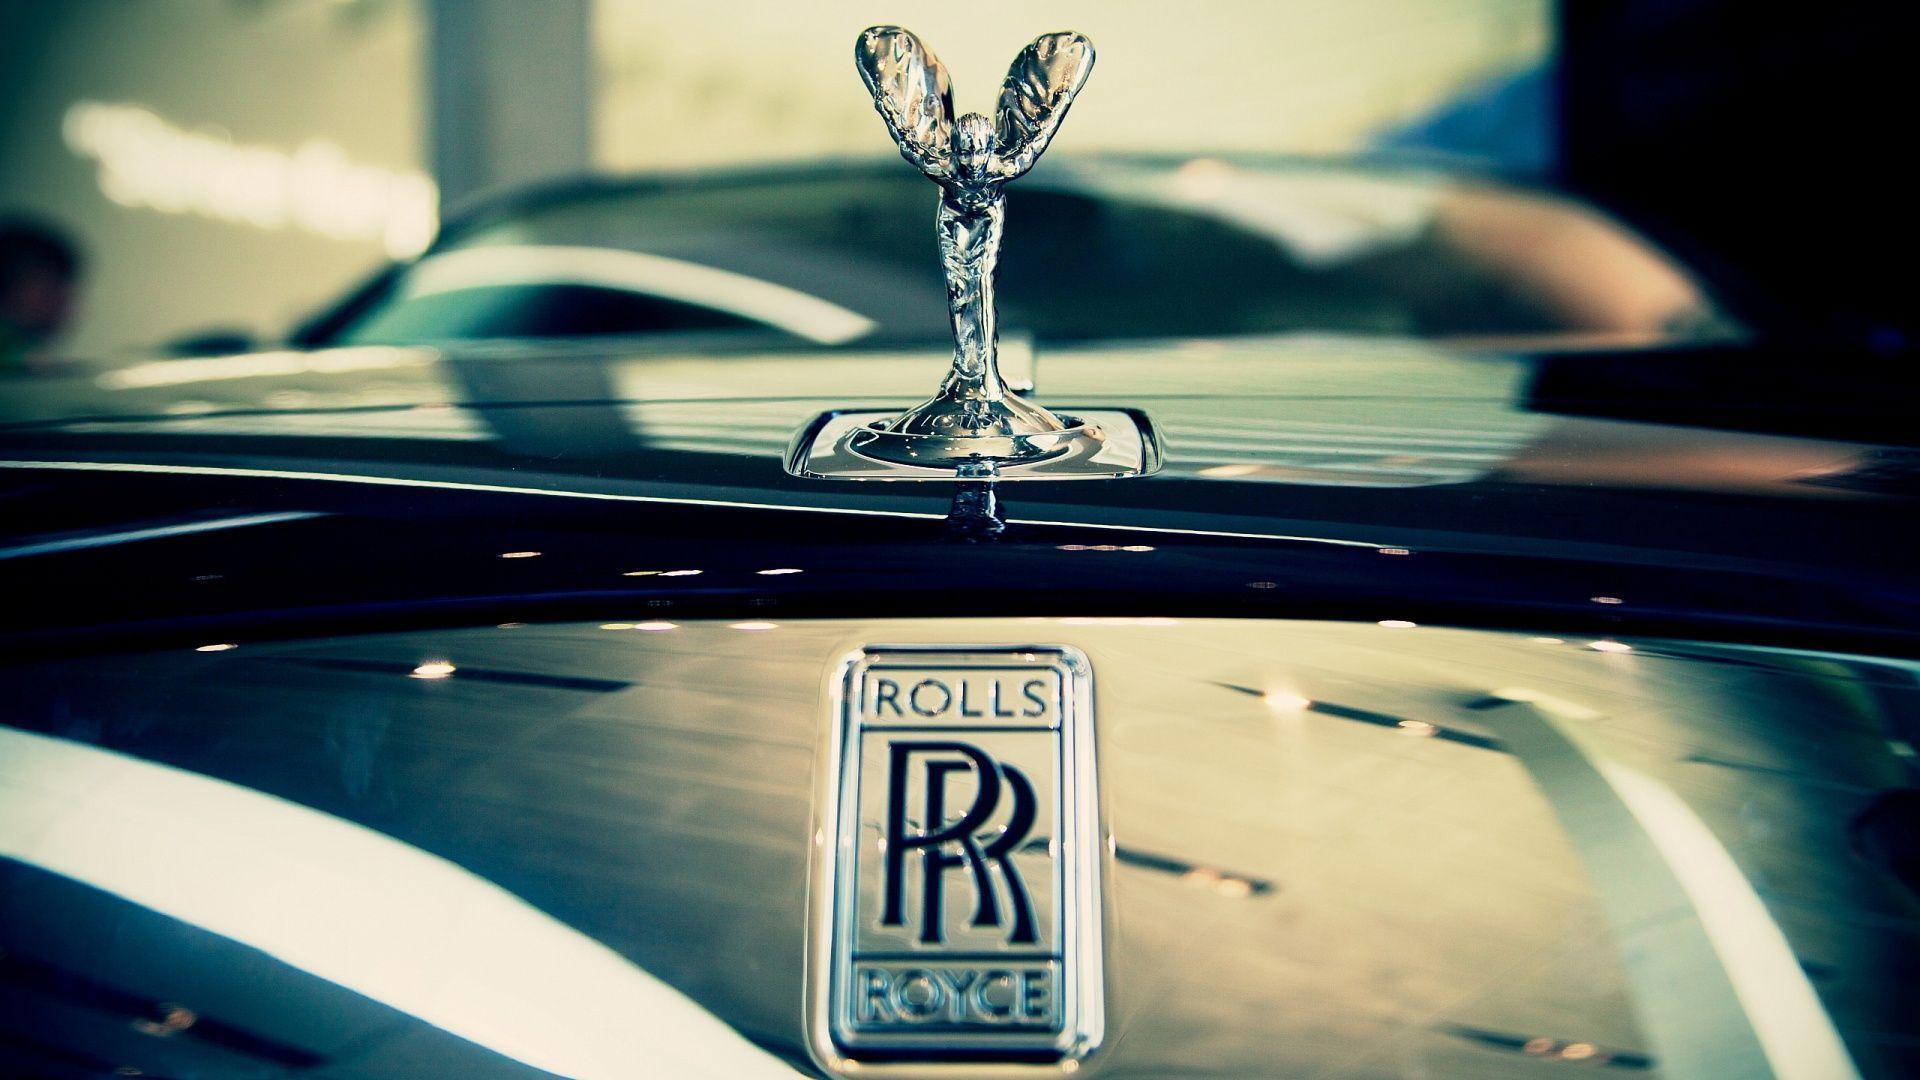 Rolls Royce Motor Cars Sold A Record Number Of Cars Last Year